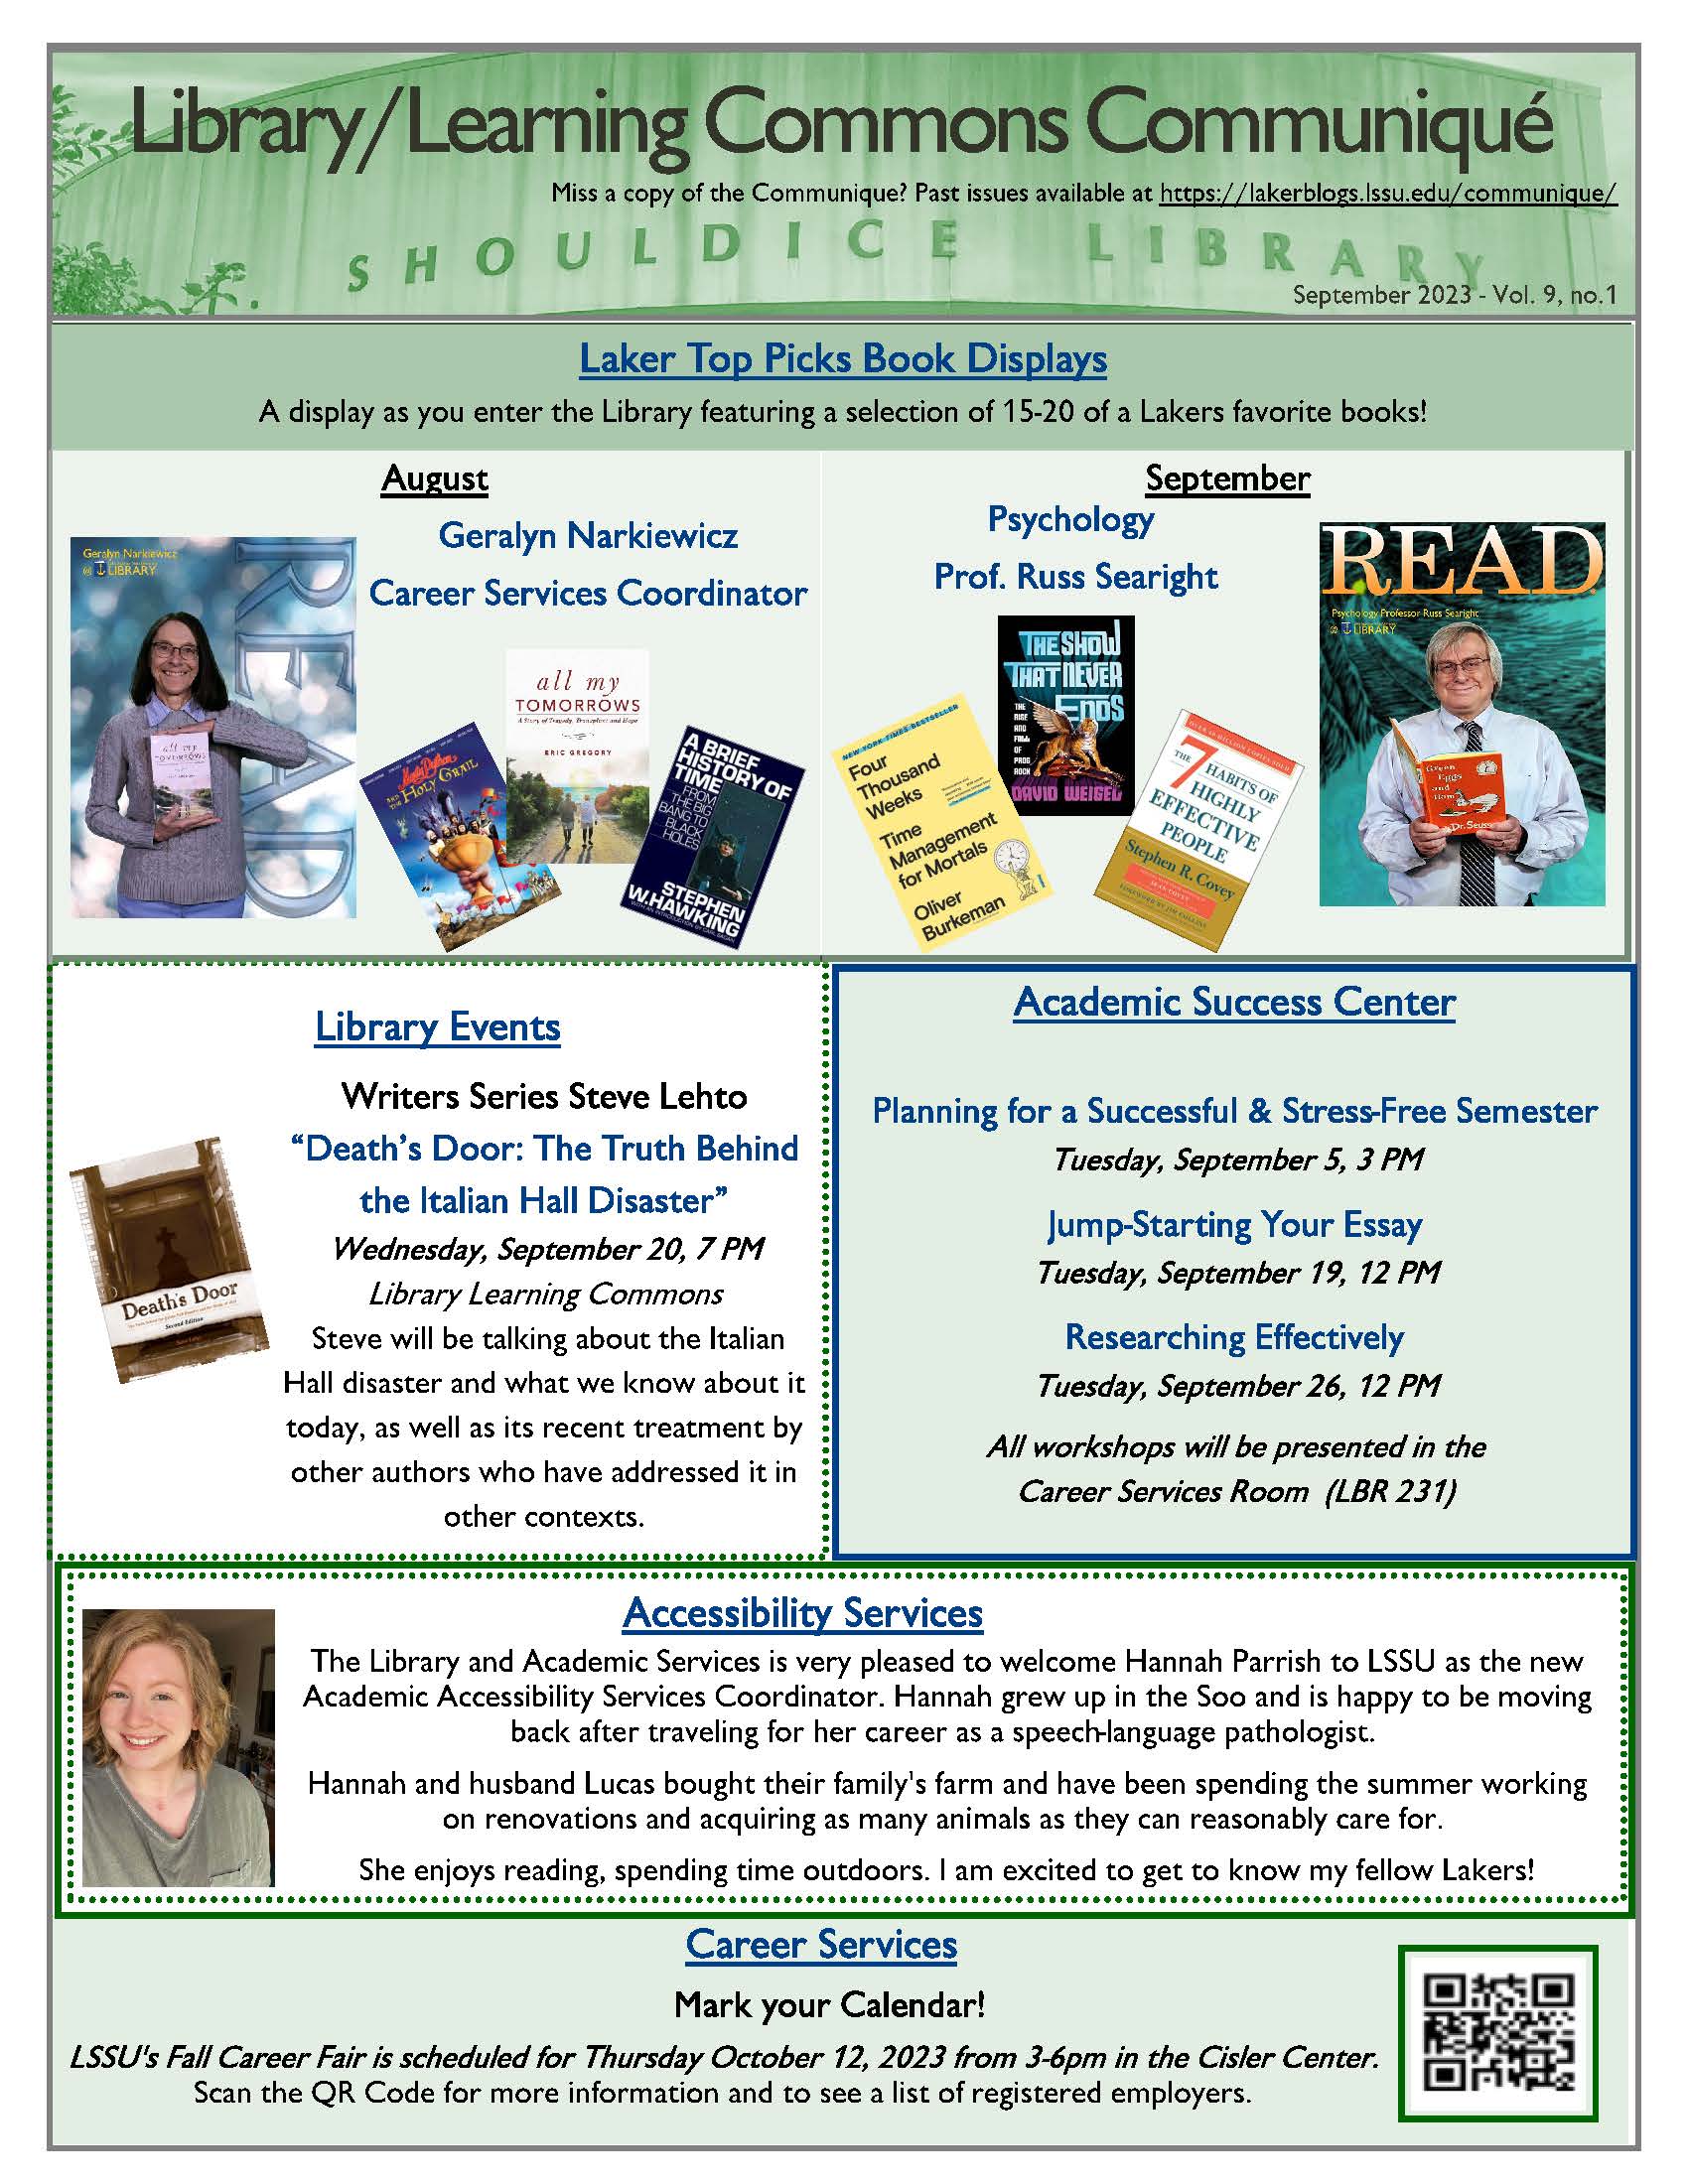 Library newsletter with information on upcoming events